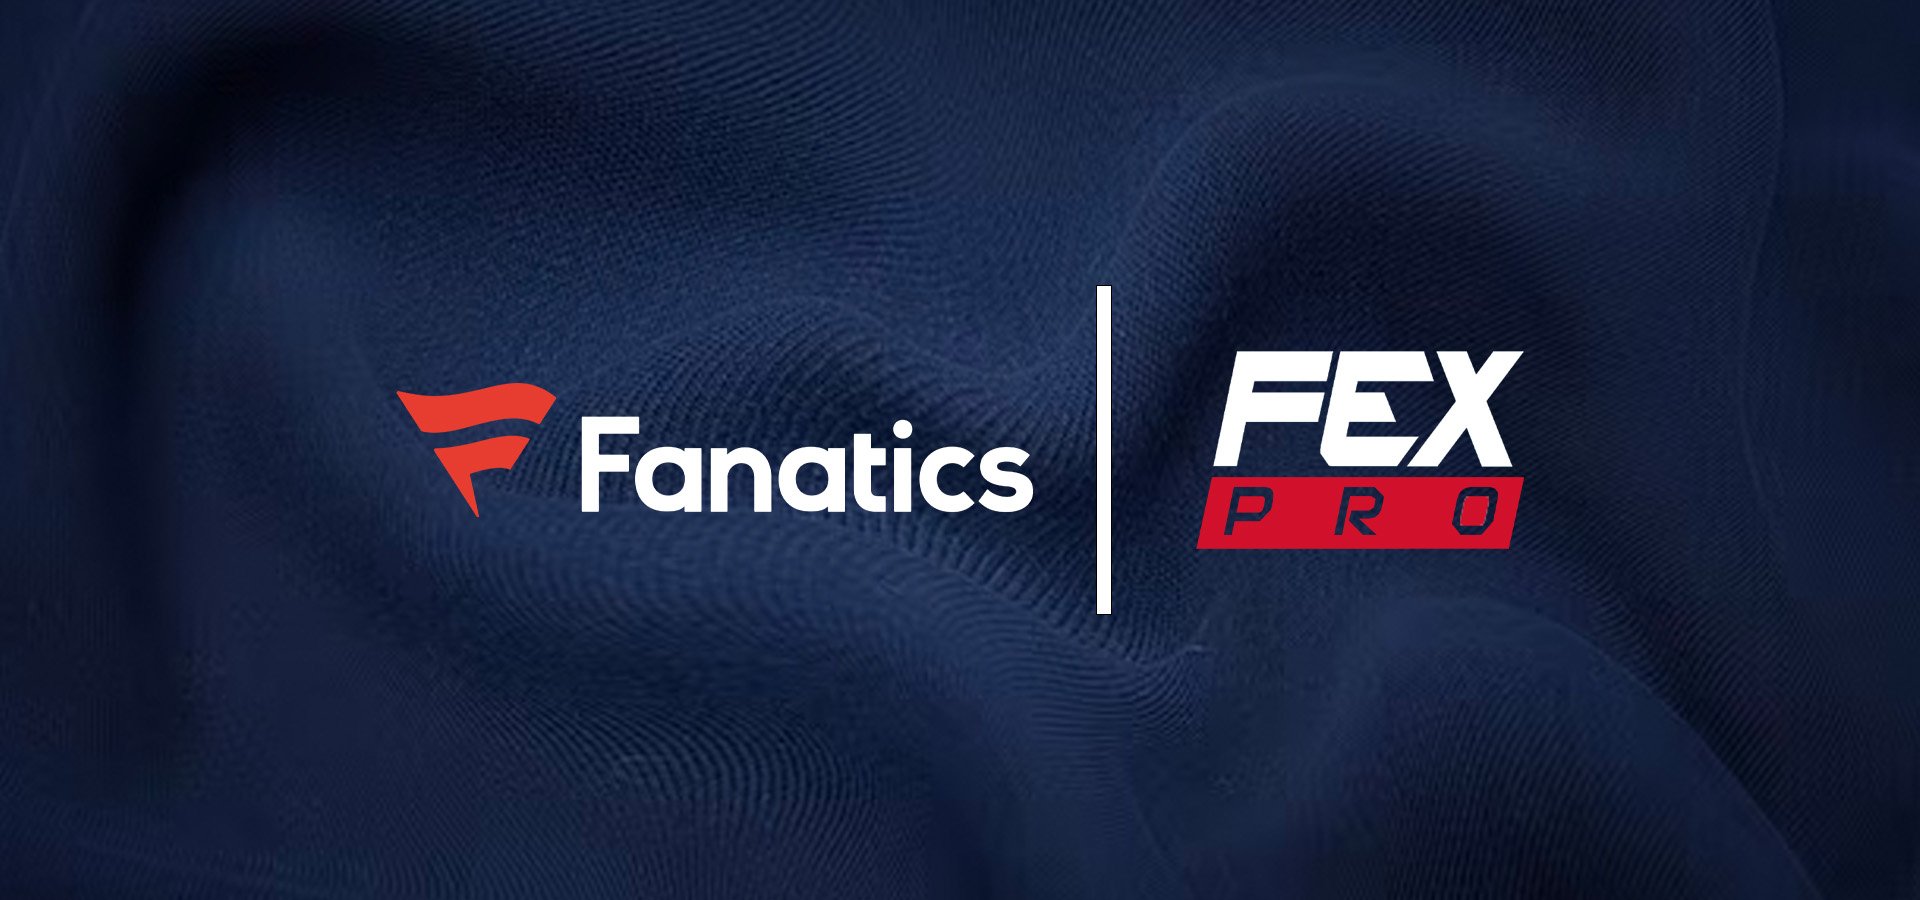 Millwall FC Signs Long-Term Multichannel Retail Partnership with Fanatics